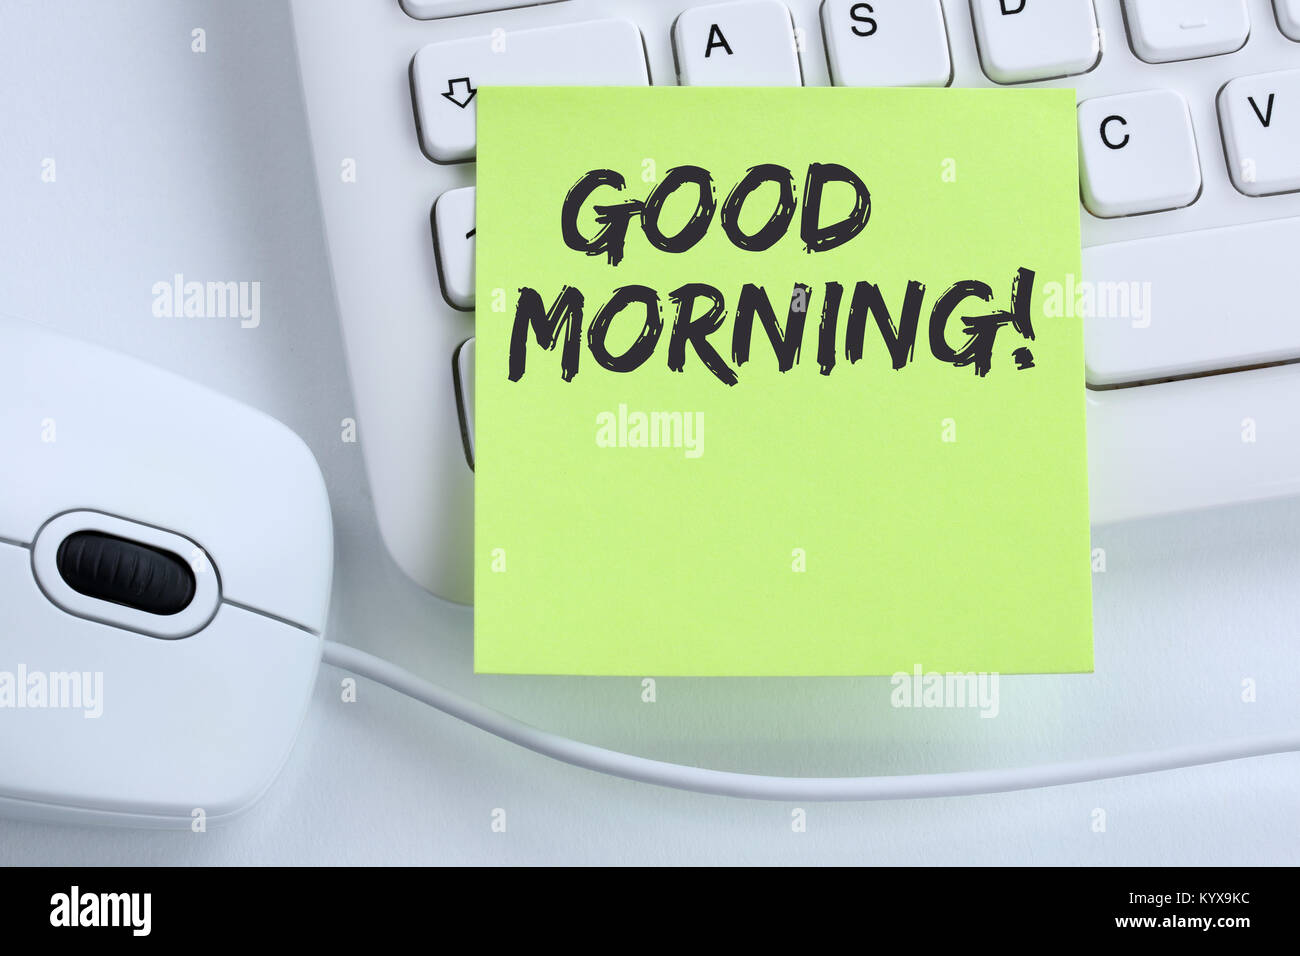 Good morning hello greeting welcome message business concept mouse computer keyboard Stock Photo